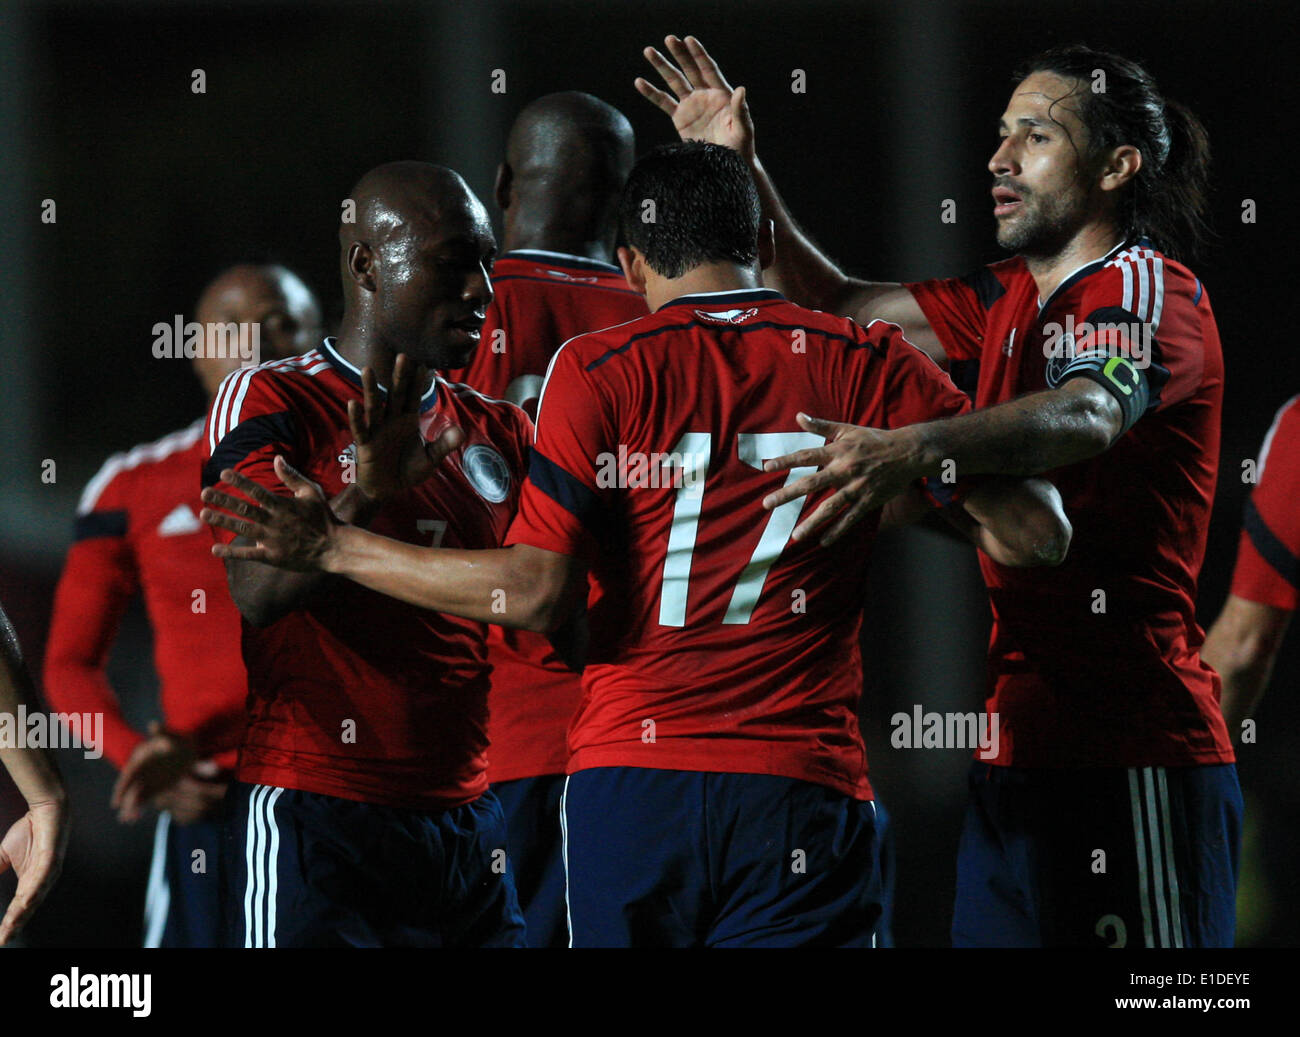 Buenos Aires, Argentina. 31st May, 2014. Carlos Bacca (C) of Colombia celebrates his goal with teammates during a friendly soccer match against Senegal in Buenos Aires, capital of Argentina, on May 31, 2014. © Martin Zabala/Xinhua/Alamy Live News Stock Photo